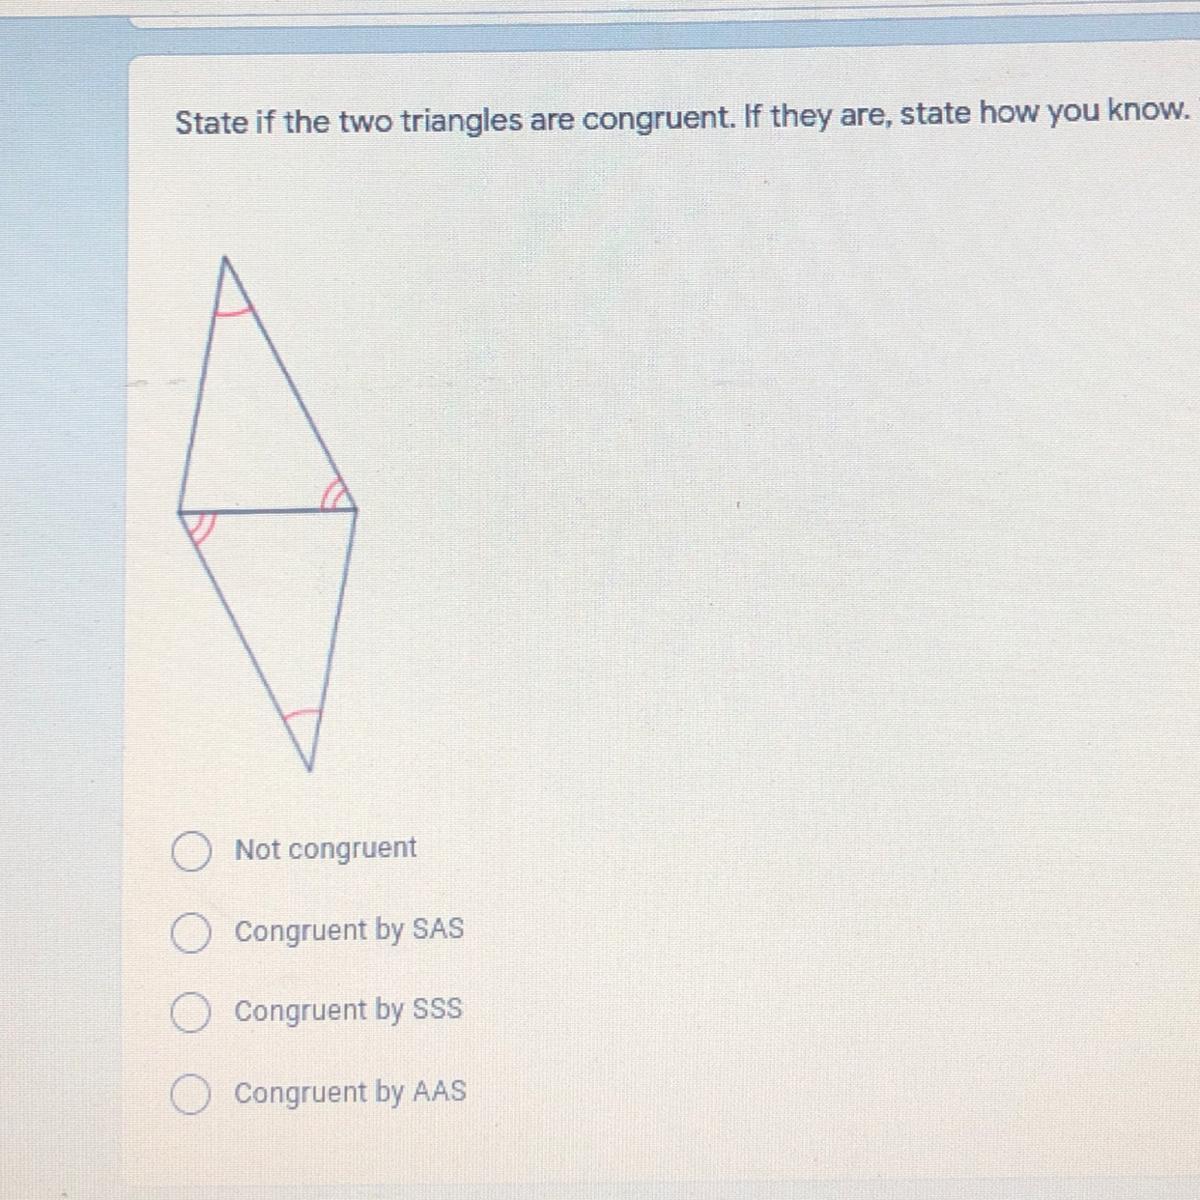 State If The Two Triangles Are Congruent. If They Are, State How You Know. (look At The Picture)